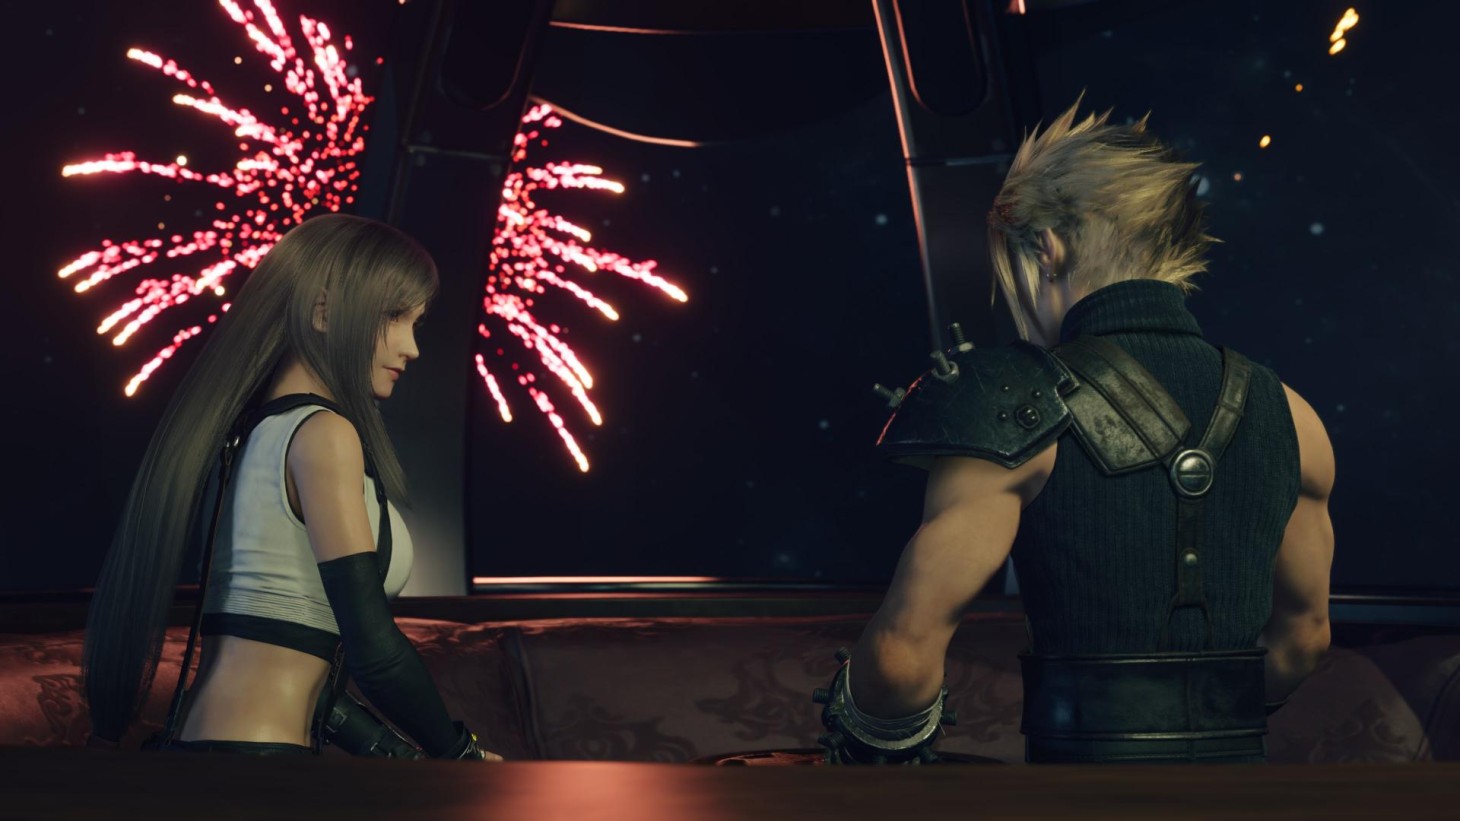 Final Fantasy 7 Rebirth Release Date, Demo, Gameplay, Story